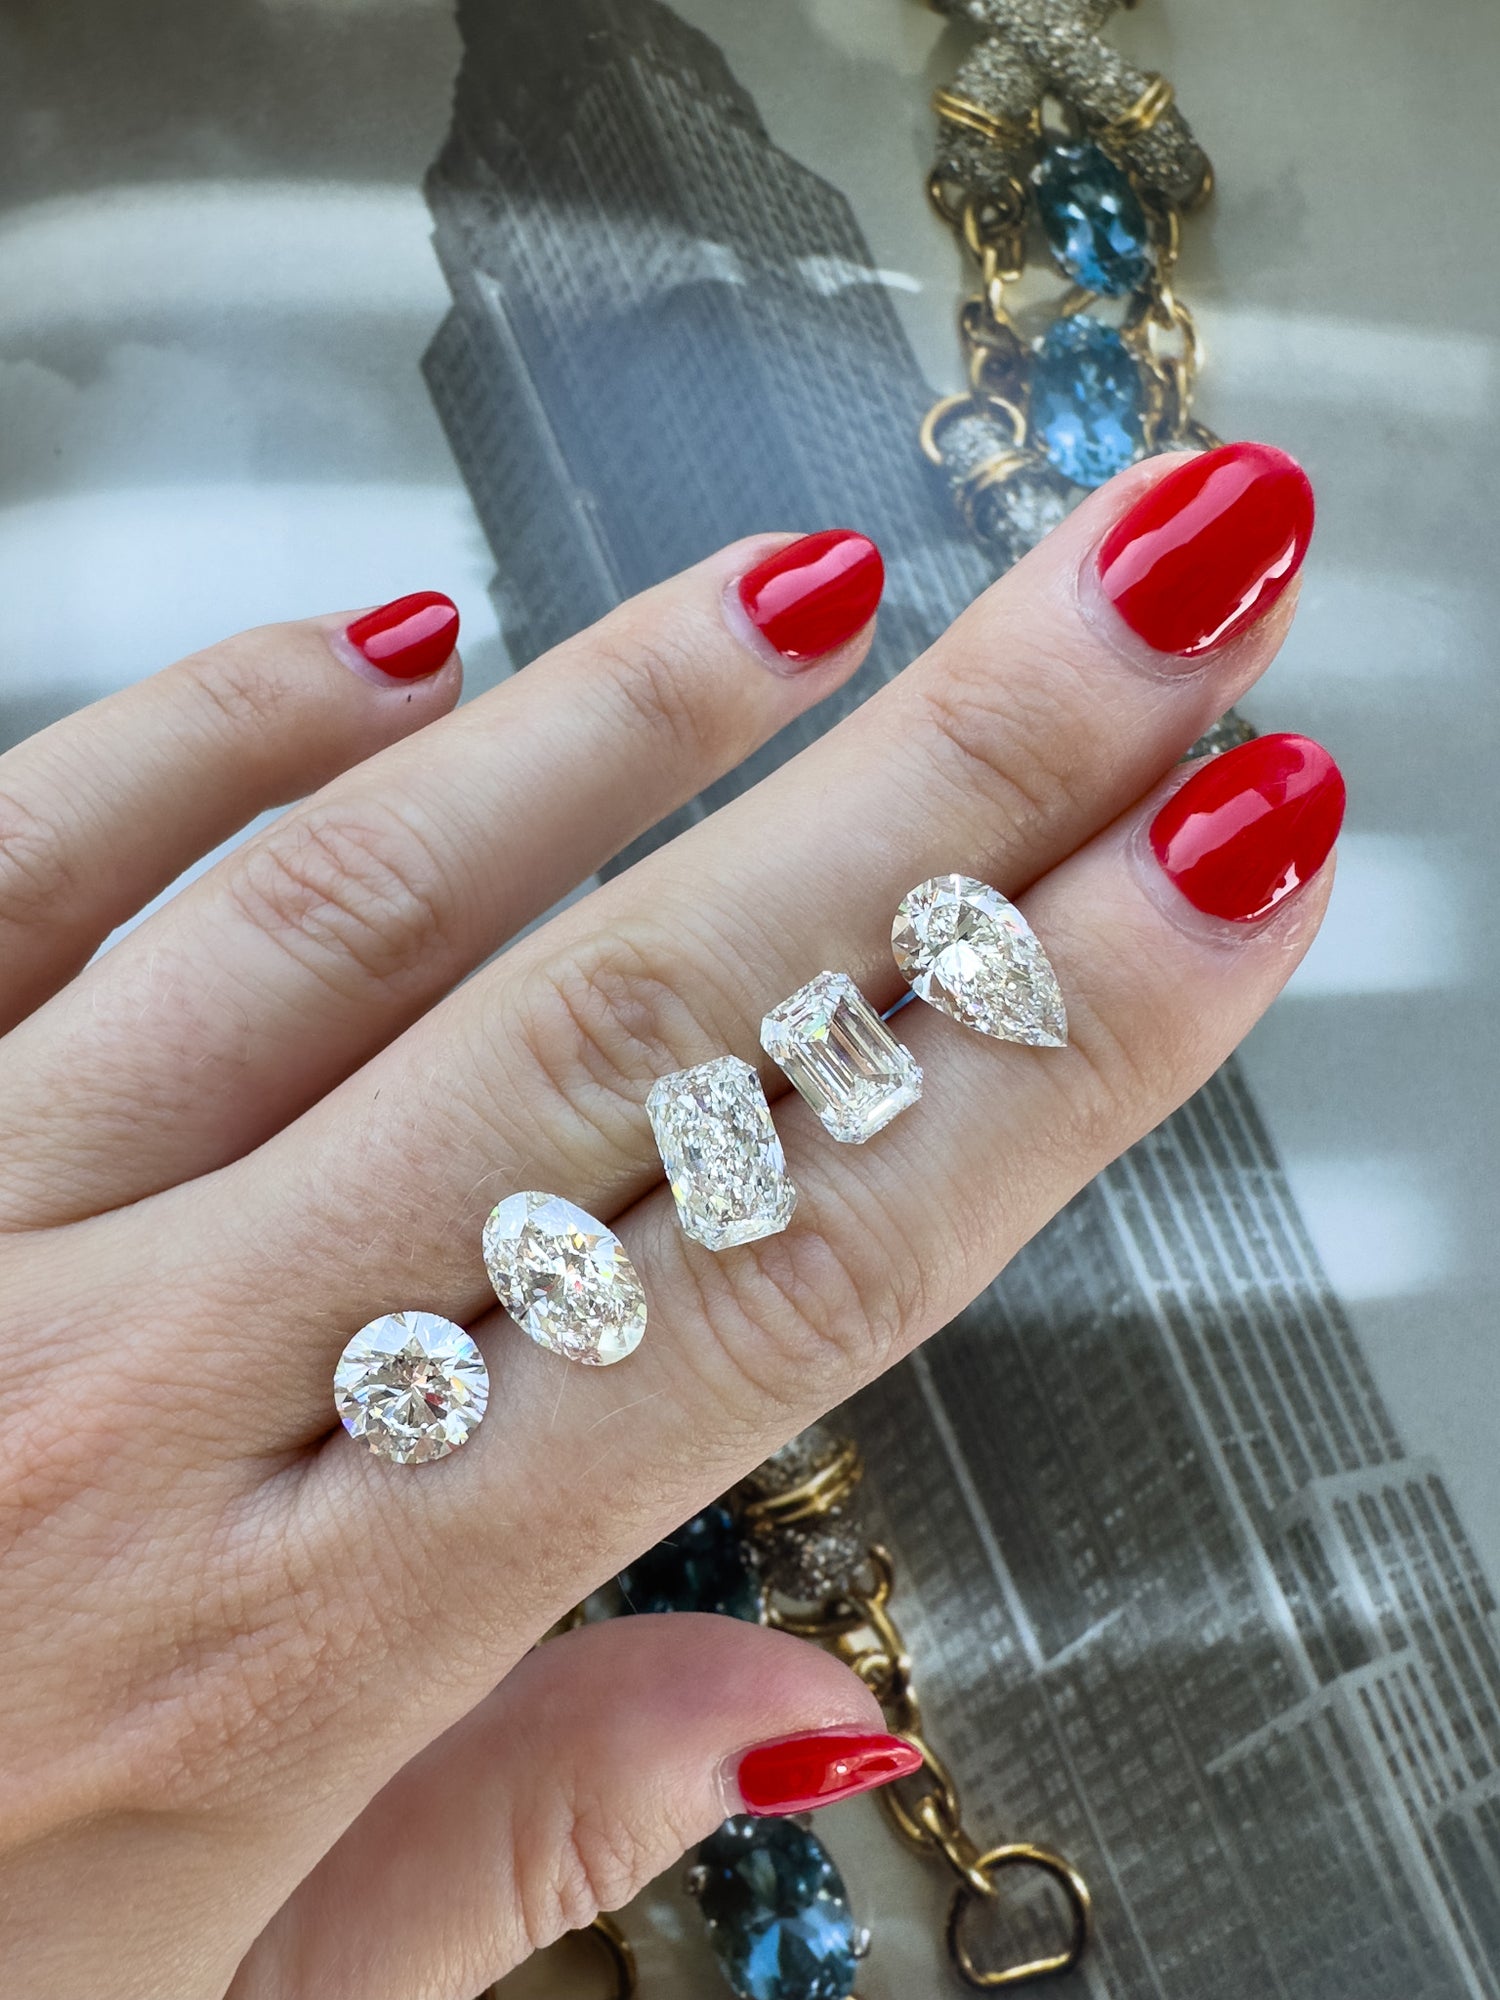 Diamond dealer Hong Kong. 3 carat diamonds for engagement ring by Valentina Fine Jewellery.  Round brilliant, Oval Cut, elongated radiant cut, emerald cut and pear shape diamond